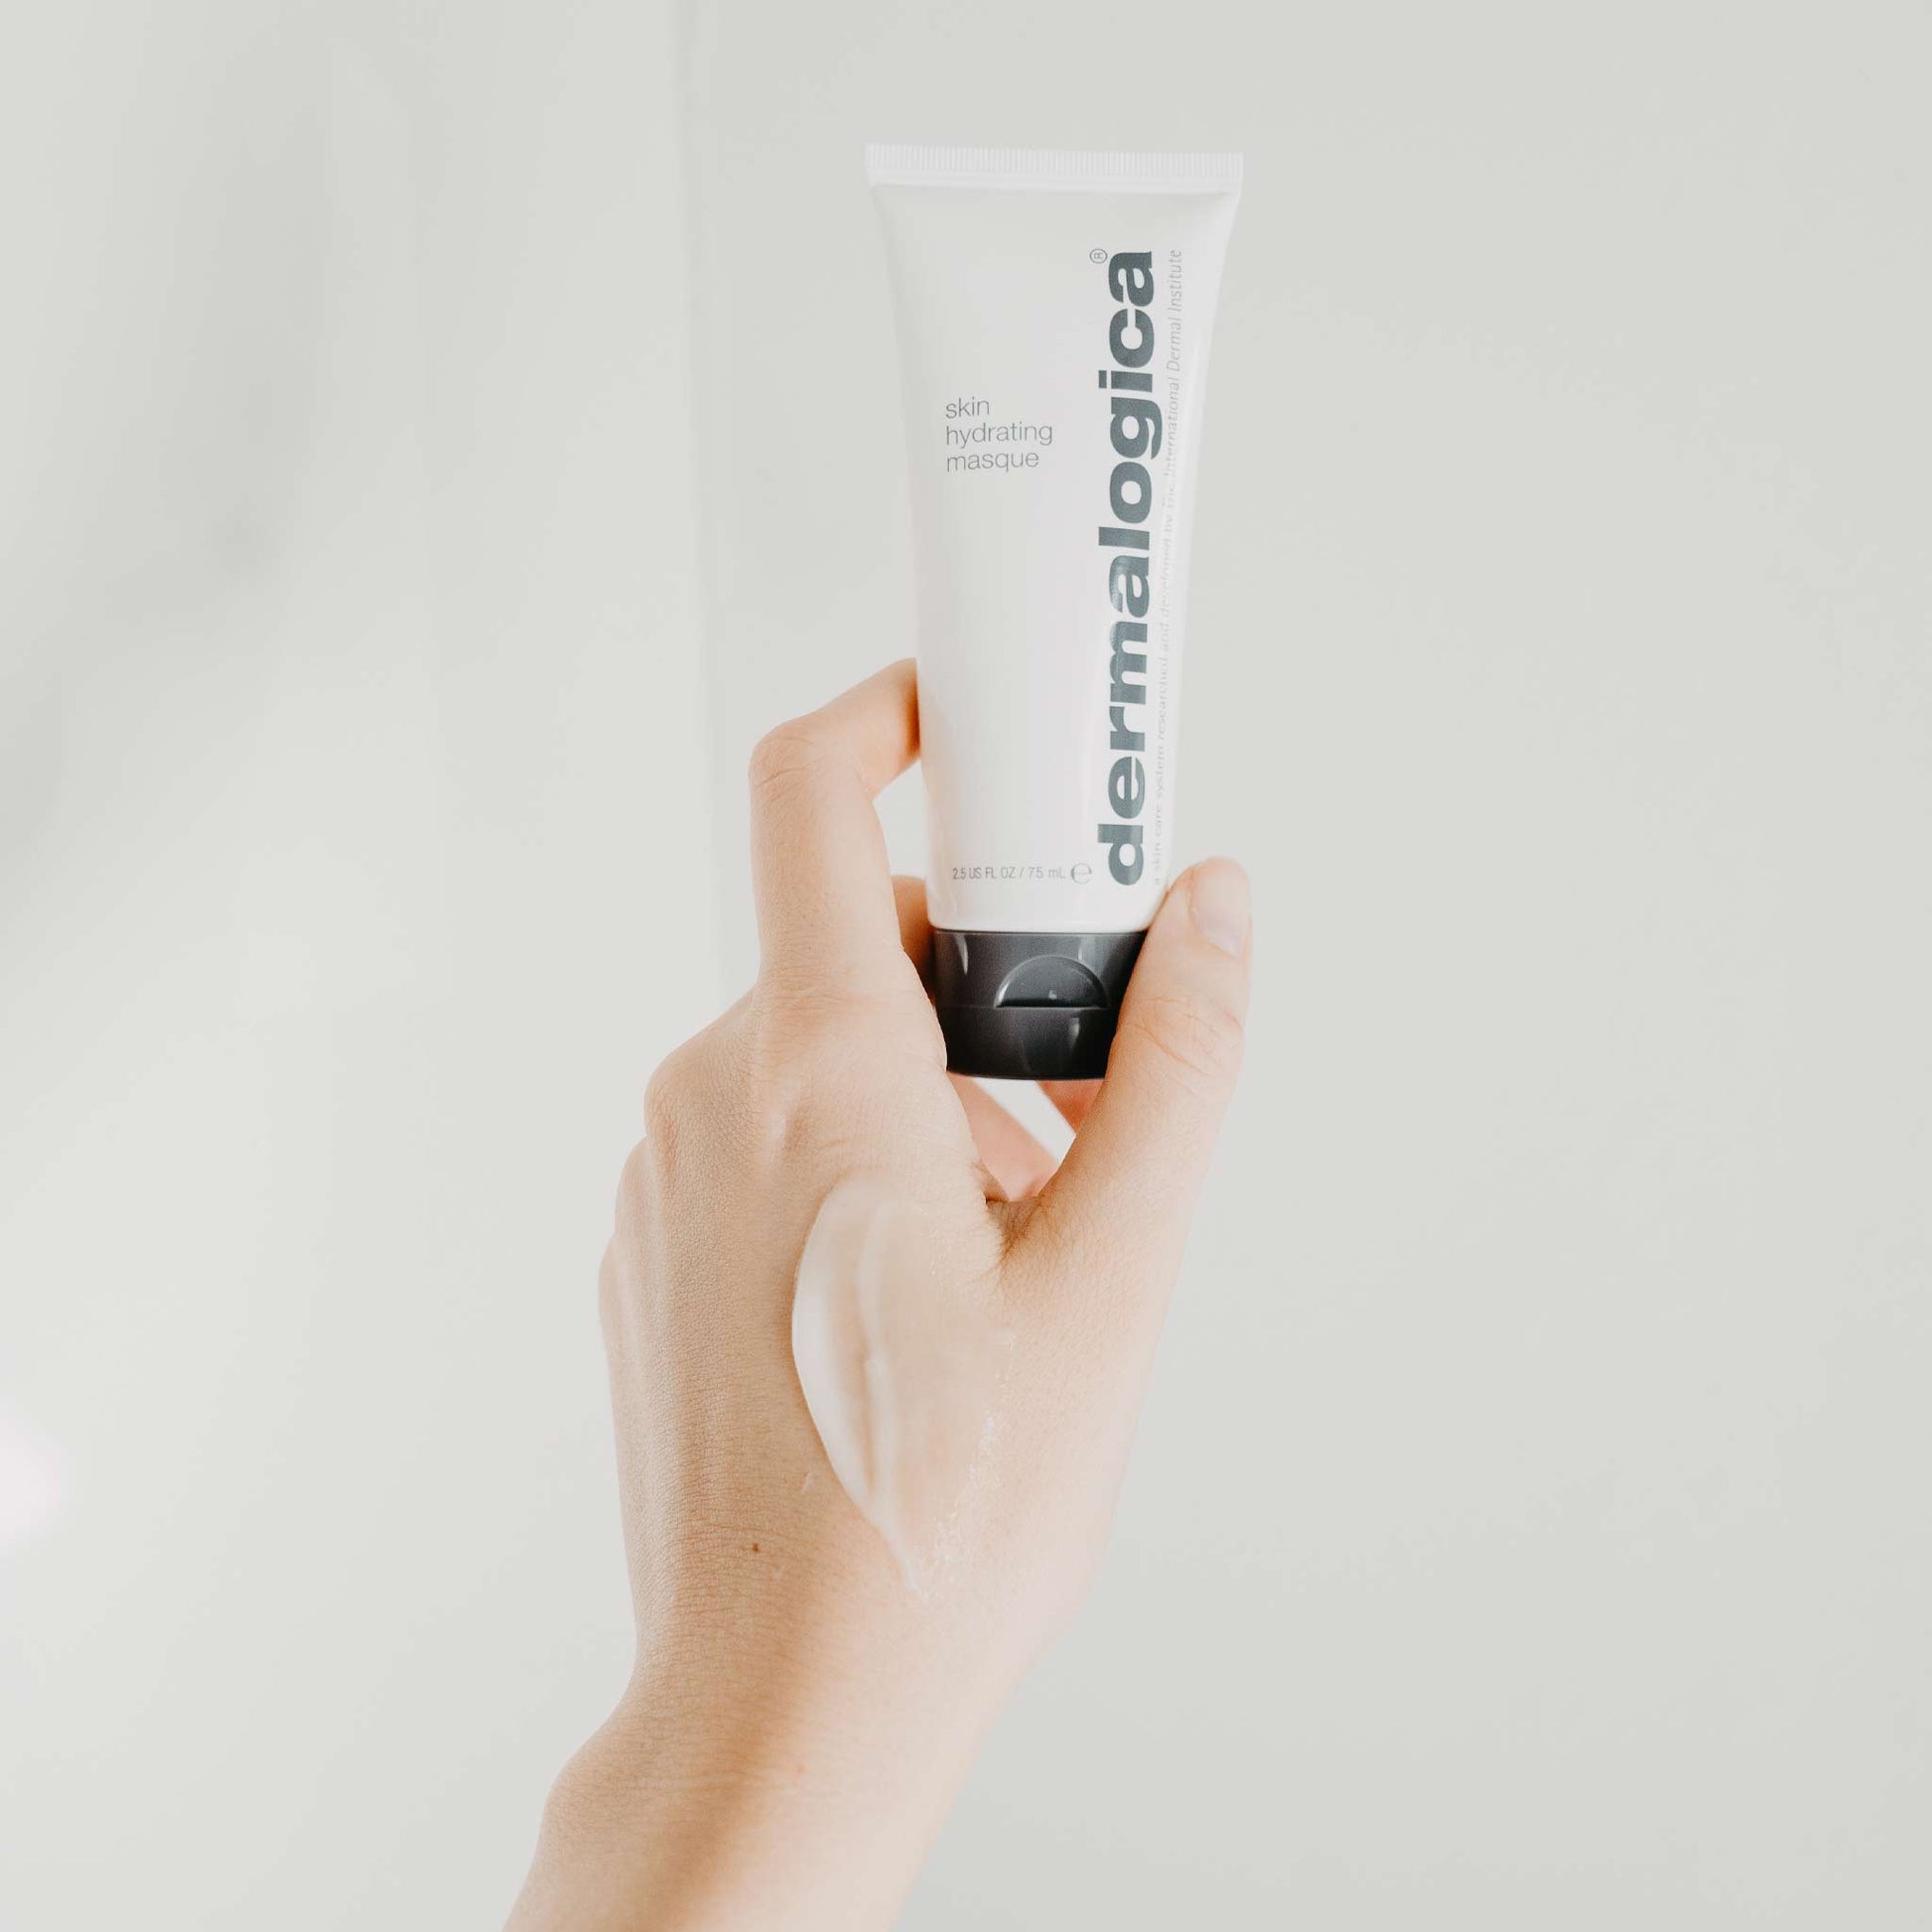 hand holding skin hydrating masque